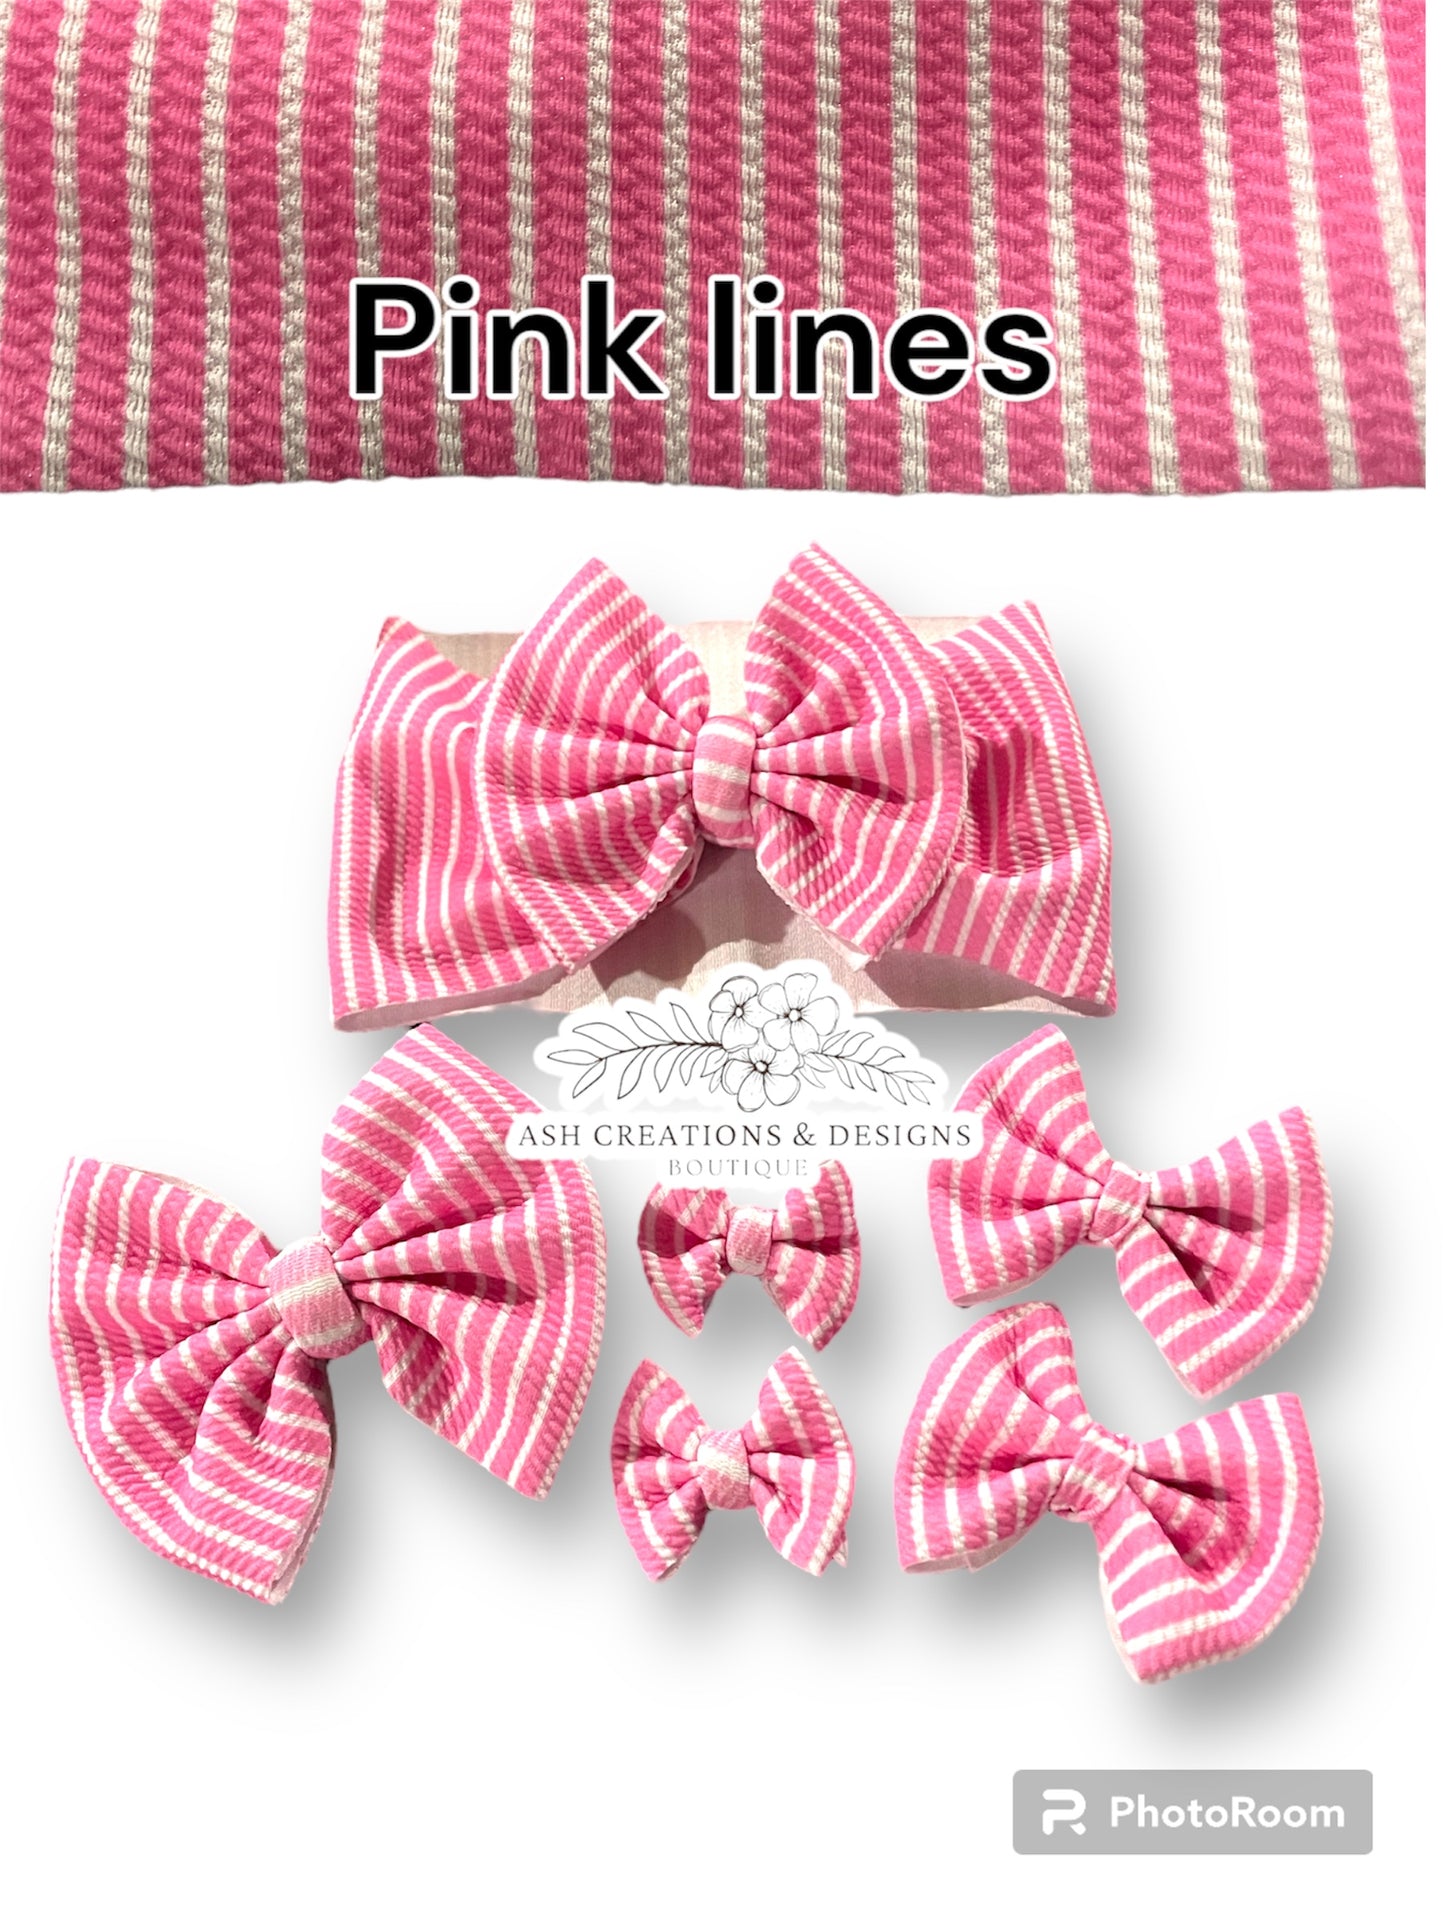 Pink lines- Wraps